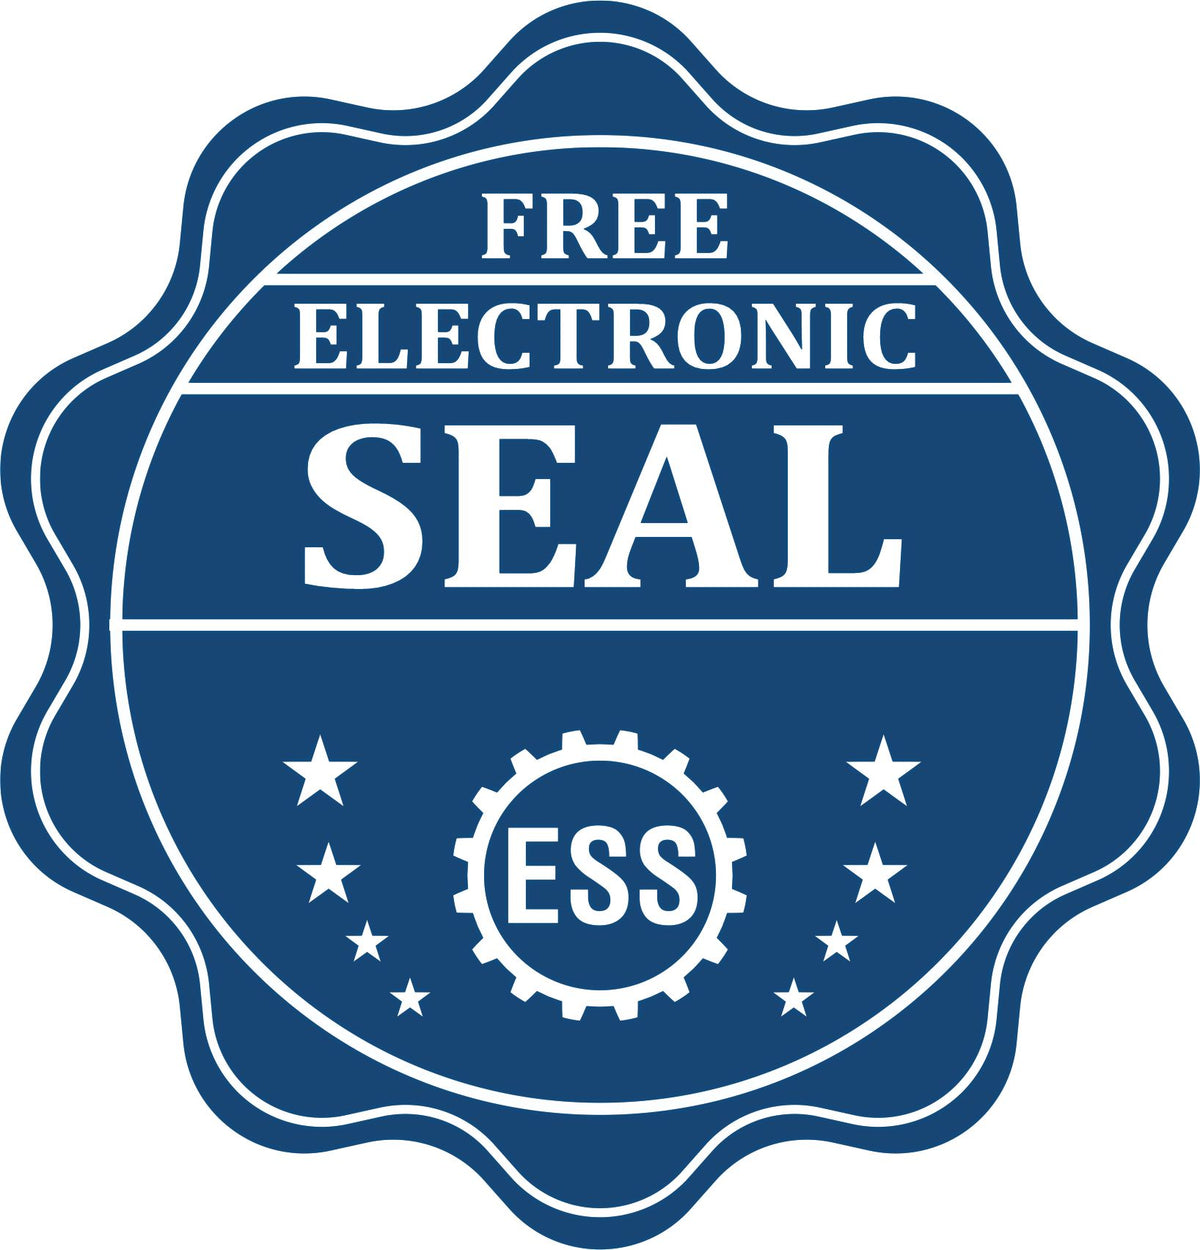 A badge showing a free electronic seal for the Heavy-Duty Georgia Rectangular Notary Stamp with stars and the ESS gear on the emblem.